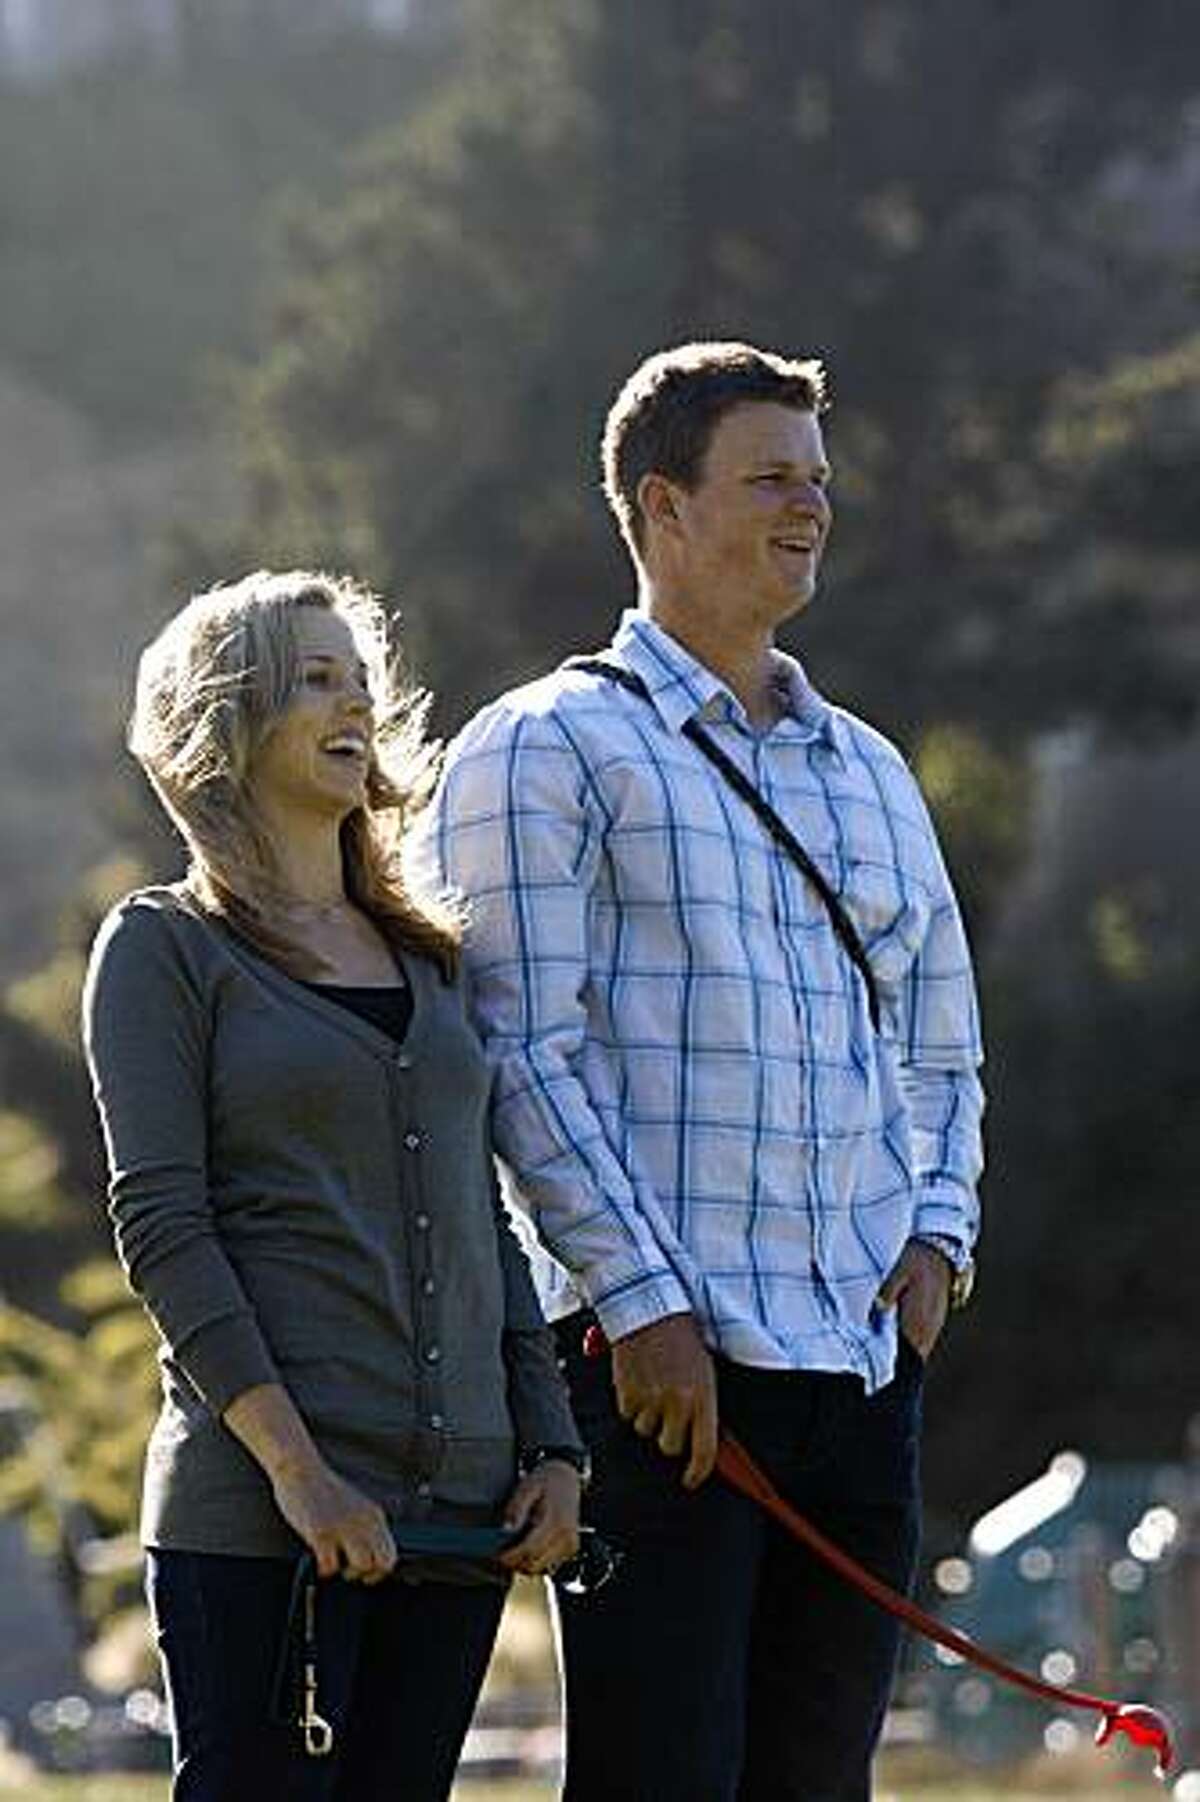 Giants pitccher Matt Cain (right) and fiance Chelsea Williams (left) share a laugh as they watch their dogs catch a ball on Sunday June 21, 2009 in San Francisco, Calif.